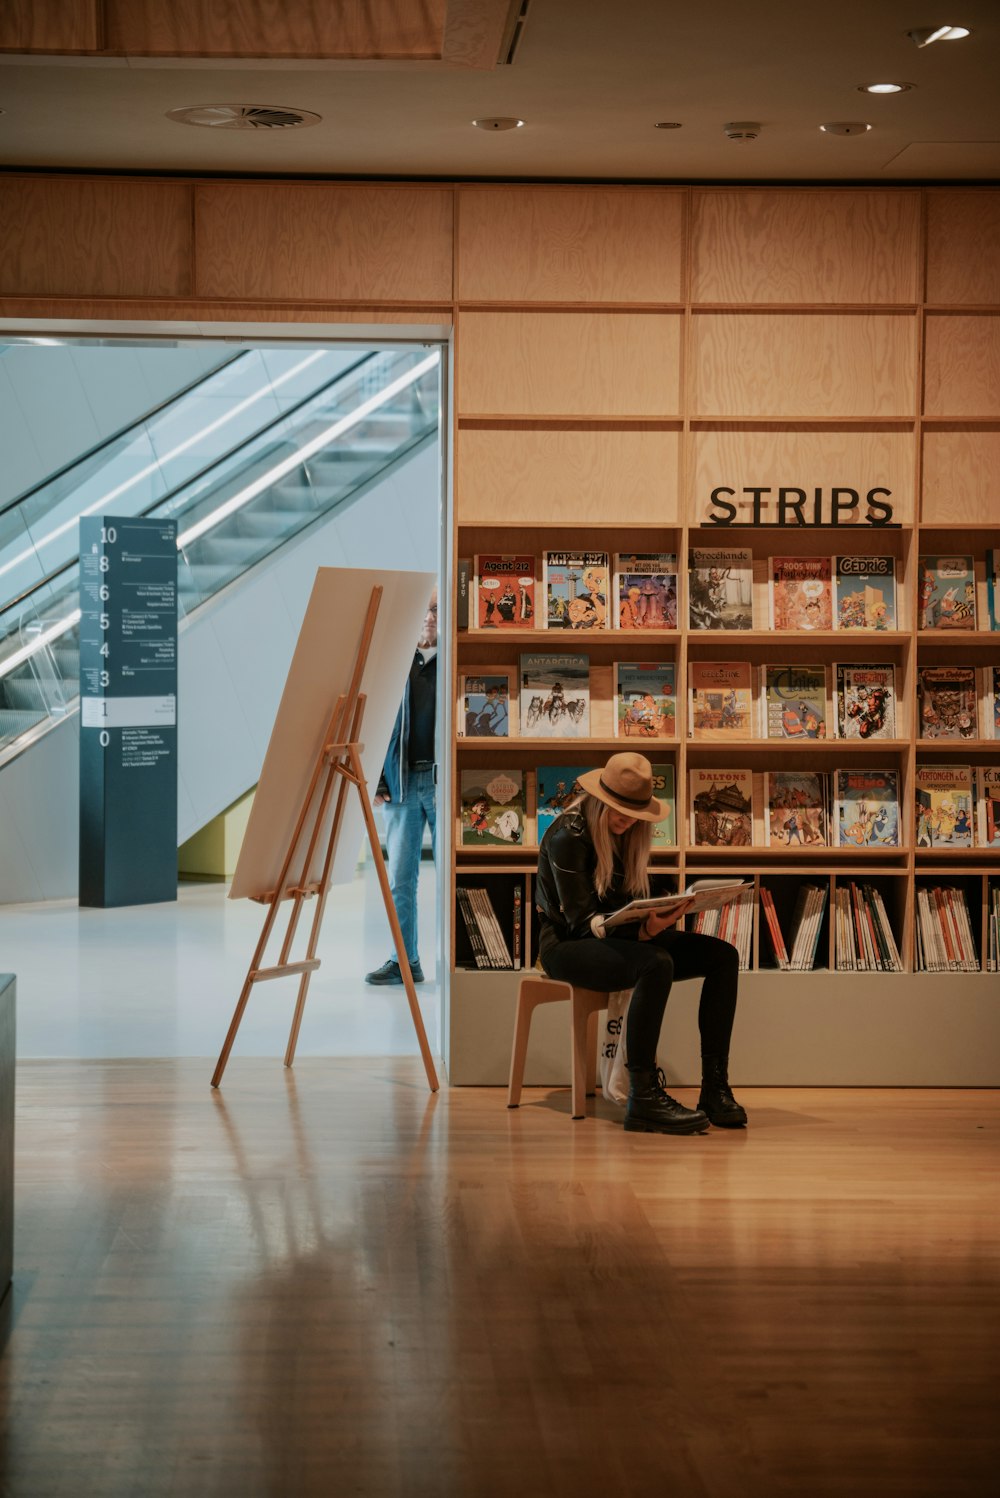 a person sitting in a chair in front of a book shelf